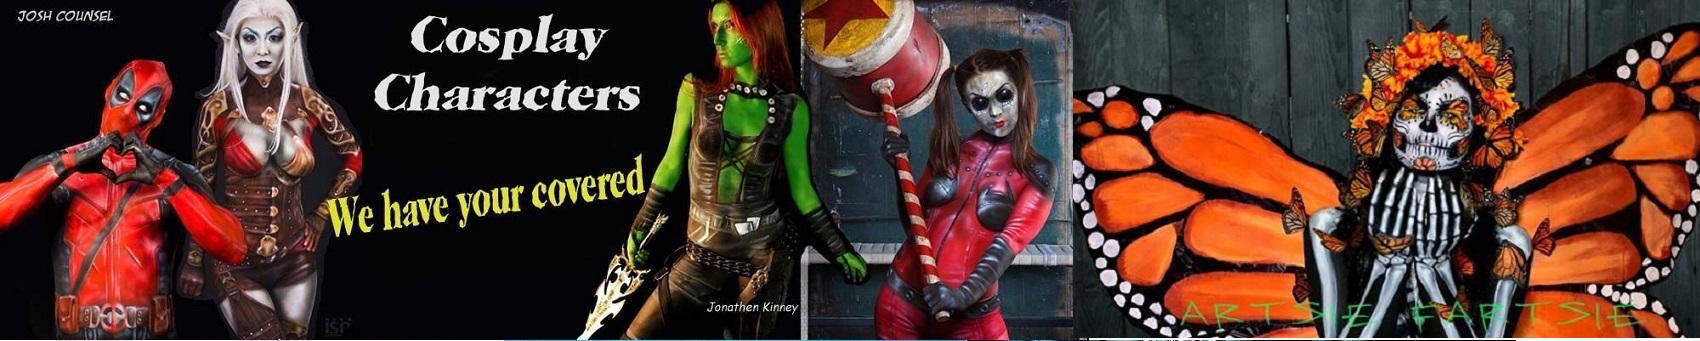 Stage Makeup Photo Cosplay_Banner_3